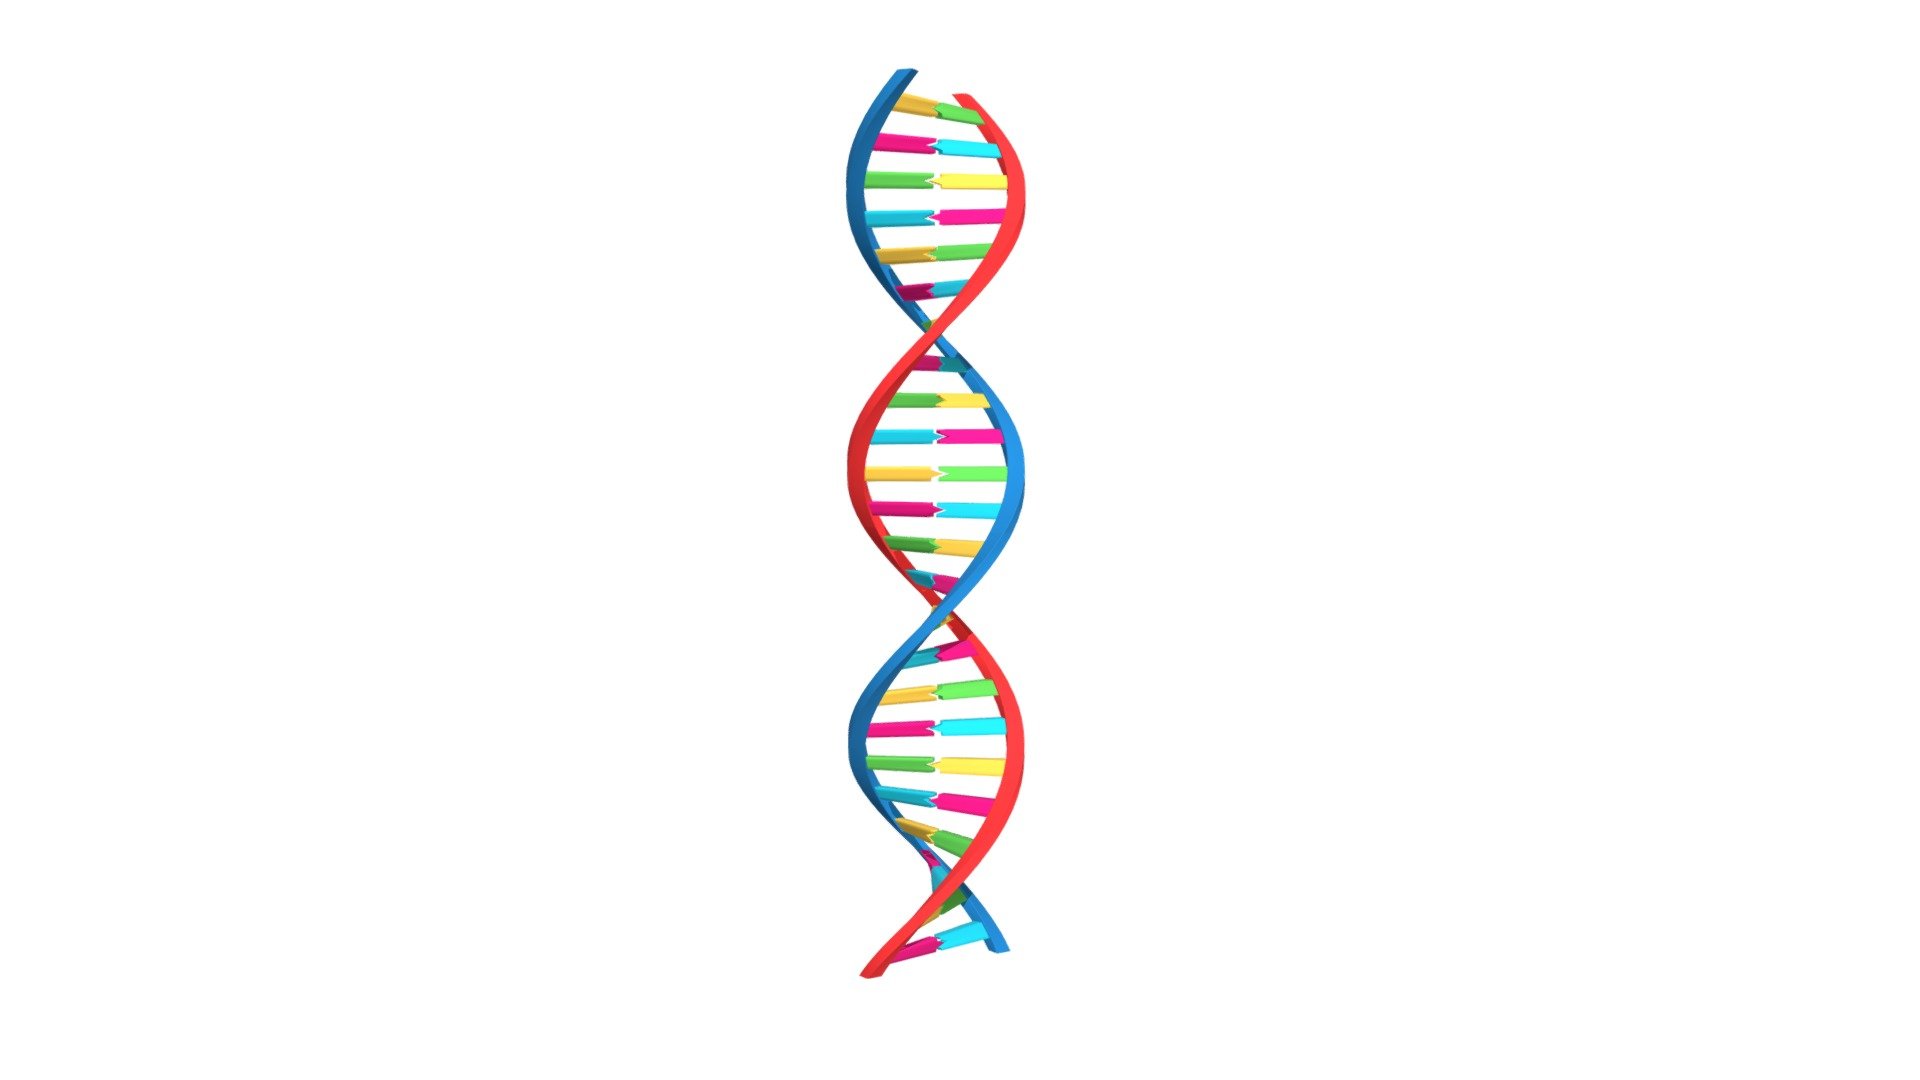 DNA 3D model with spin animation 3d model